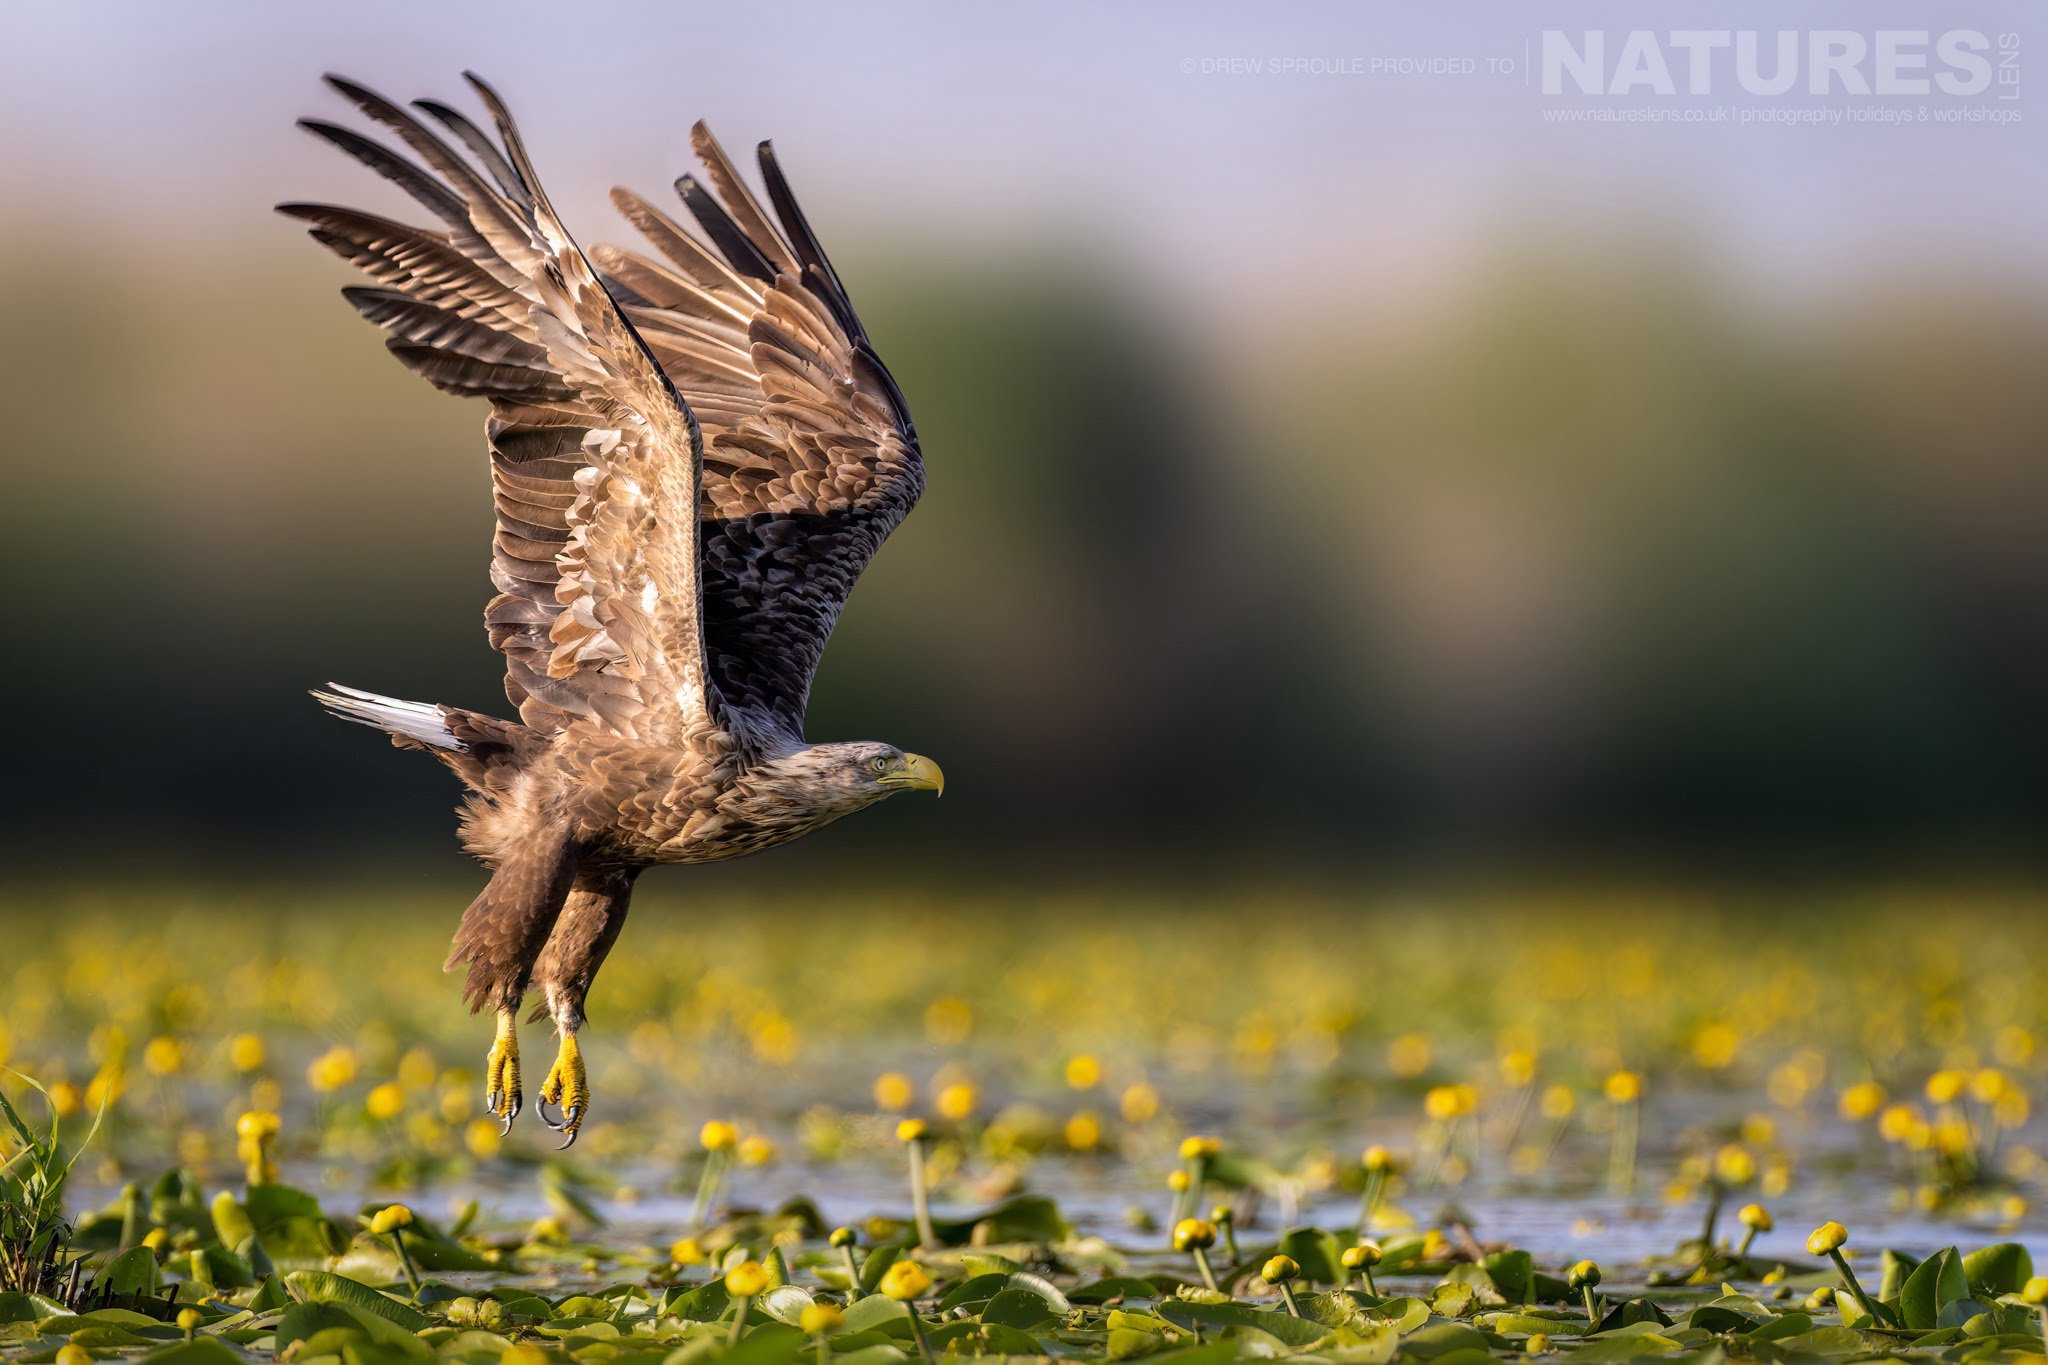 A White Tailed Eagle Takes Flight Typical Of The Kind Of Image You Will Capture During The Birdlife Of The Danube Delta Photography Trip